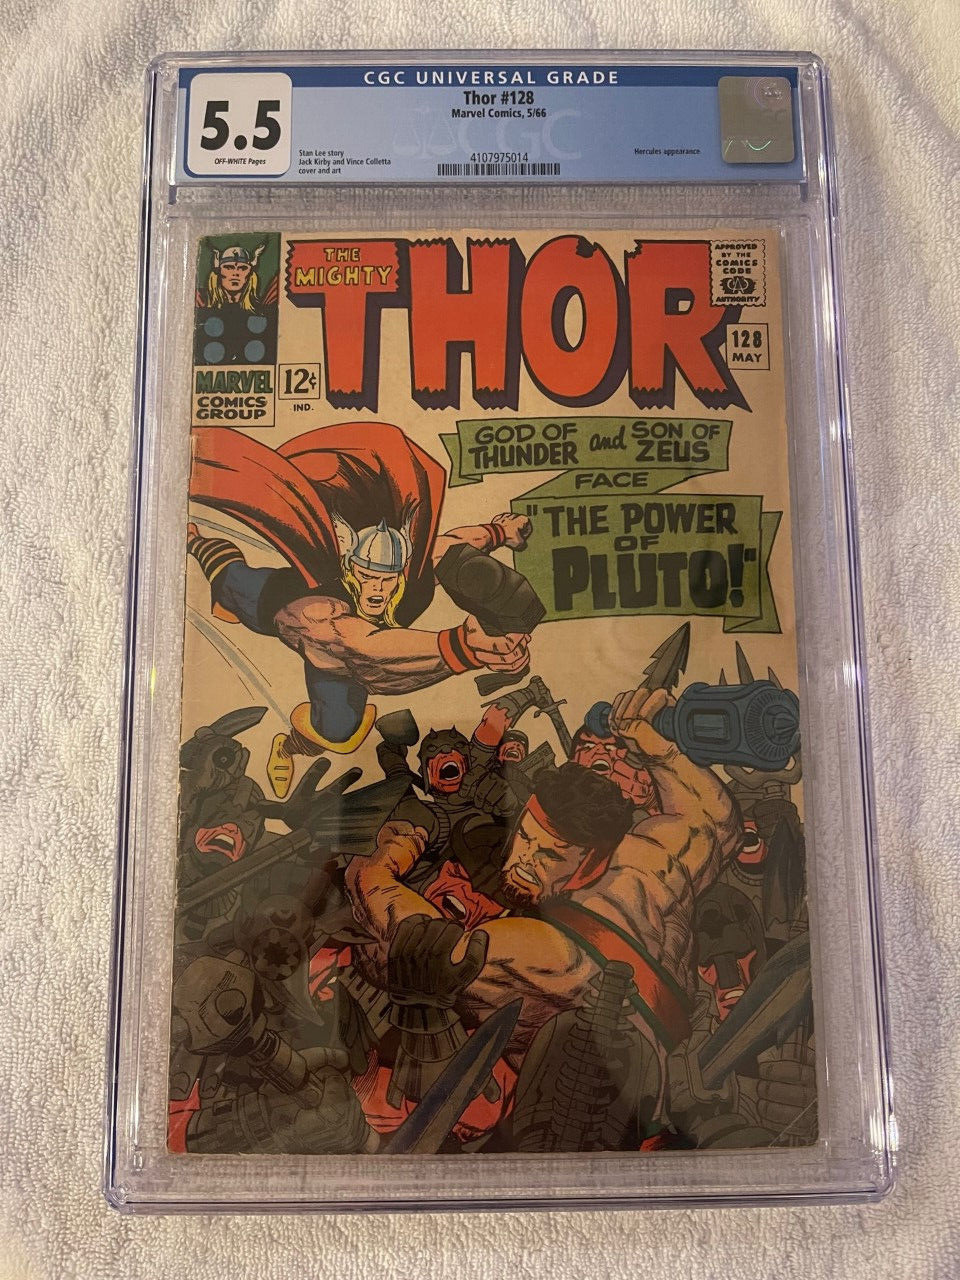 Thor #128 - CGC 5.5 - Off-White Pages - Marvel Comics 1966